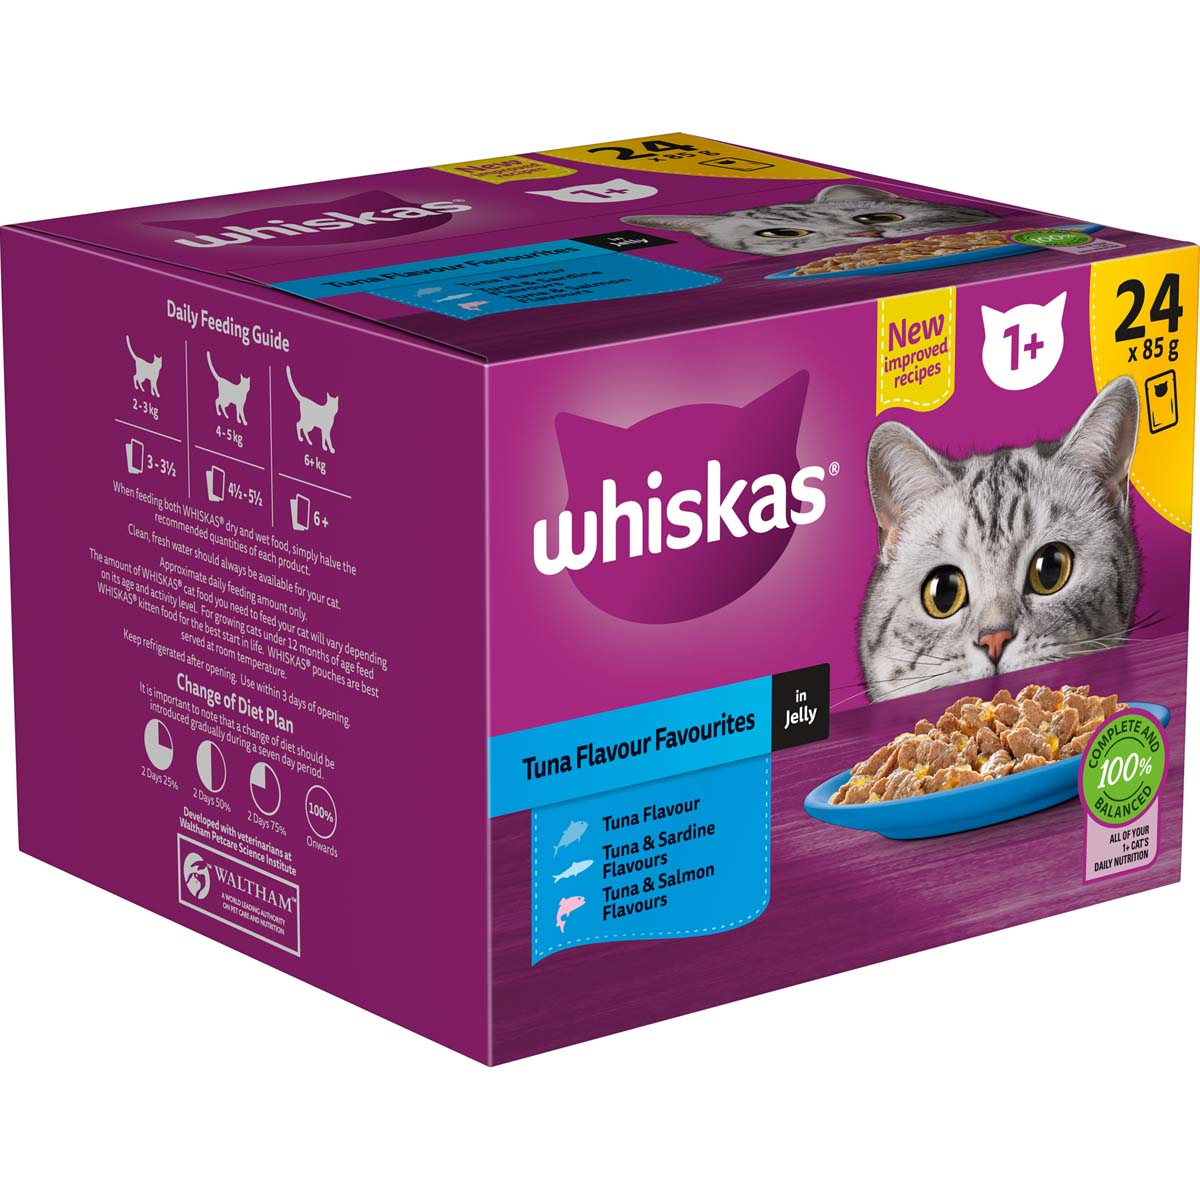 Whiskas 1 + Years Tuna Flavour Favourites In Jelly Pouches Wet Cat Food 24x85g